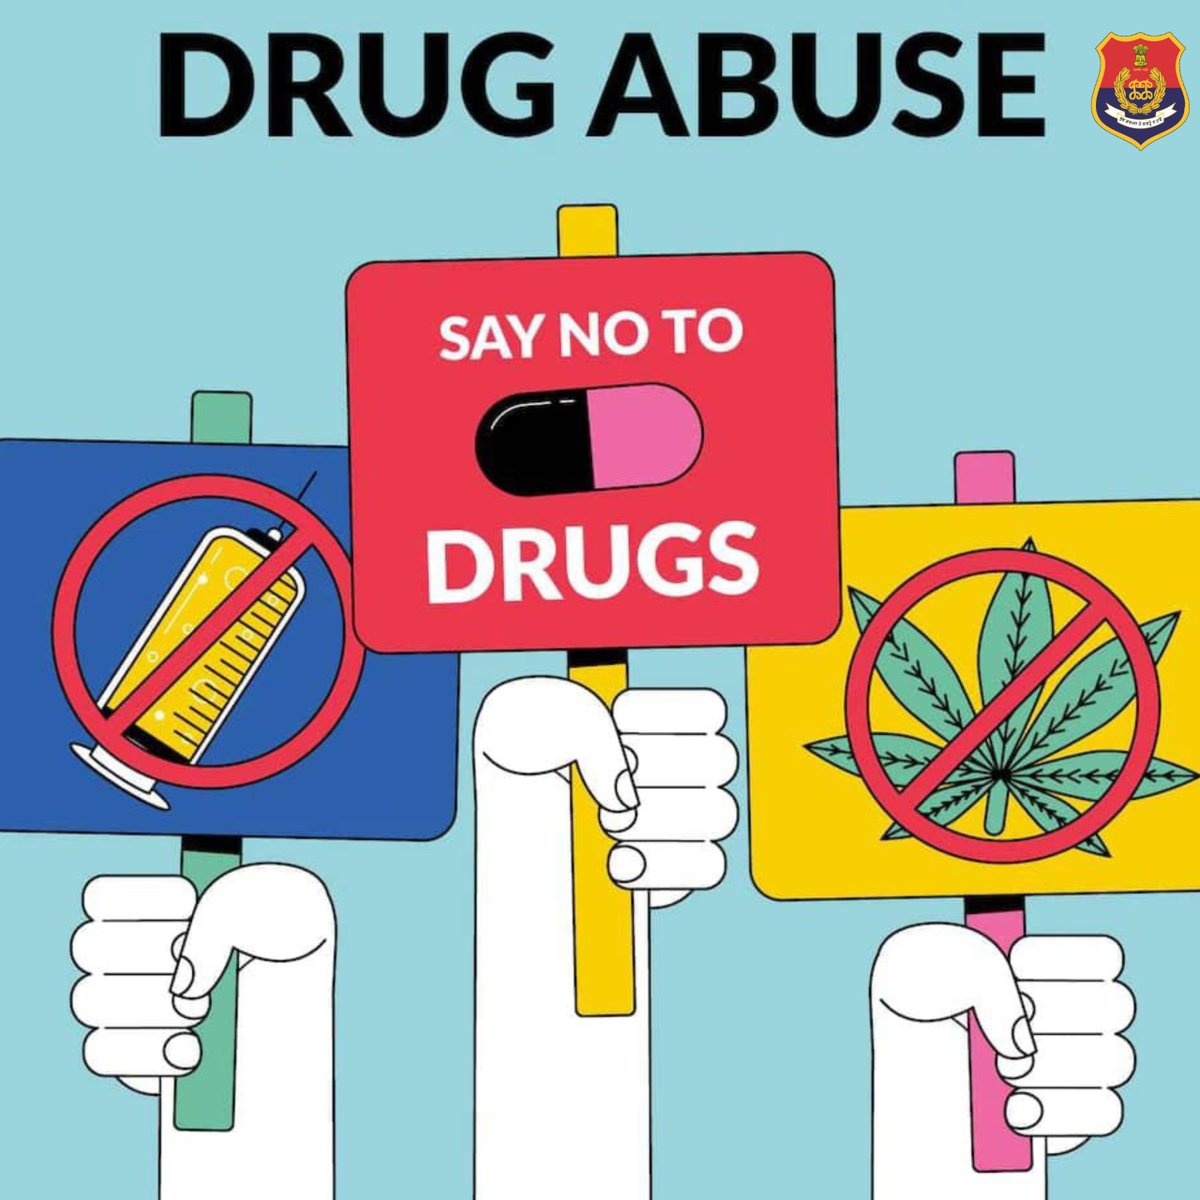 Let's #Unite with #OneVoice, one choice: #SayNoToDrugs and Yes to a Healthy #Life! Each refusal is a step towards a brighter future.

#DrugAwareness